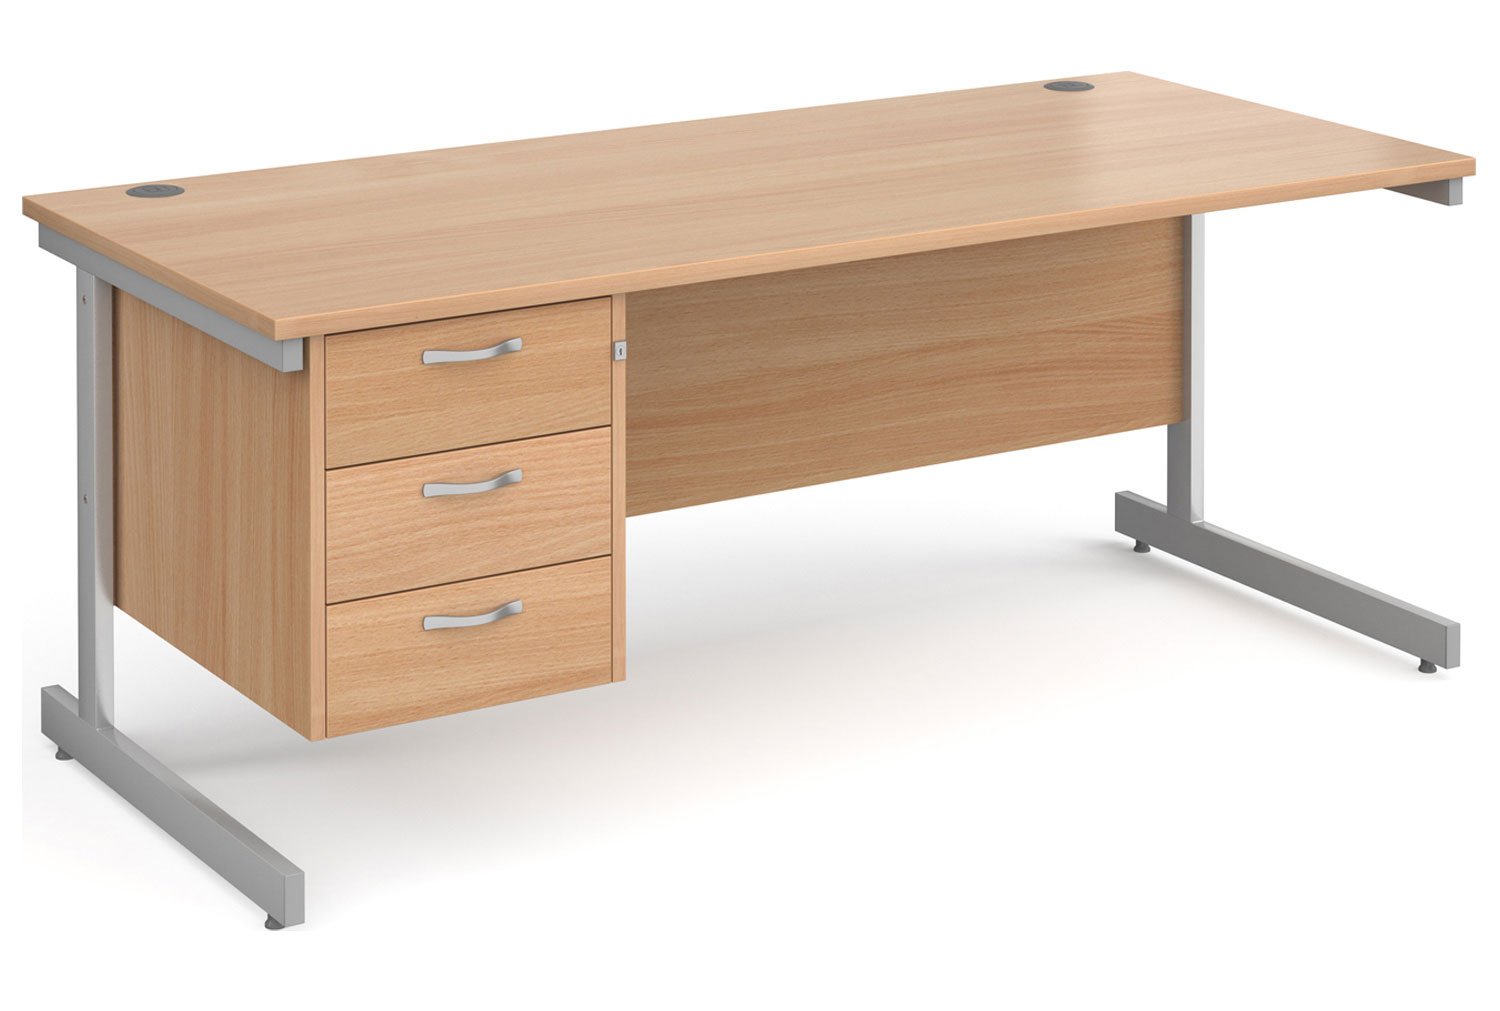 Tully I Rectangular Office Desk 3 Drawers, 180wx80dx73h (cm), Beech, Express Delivery